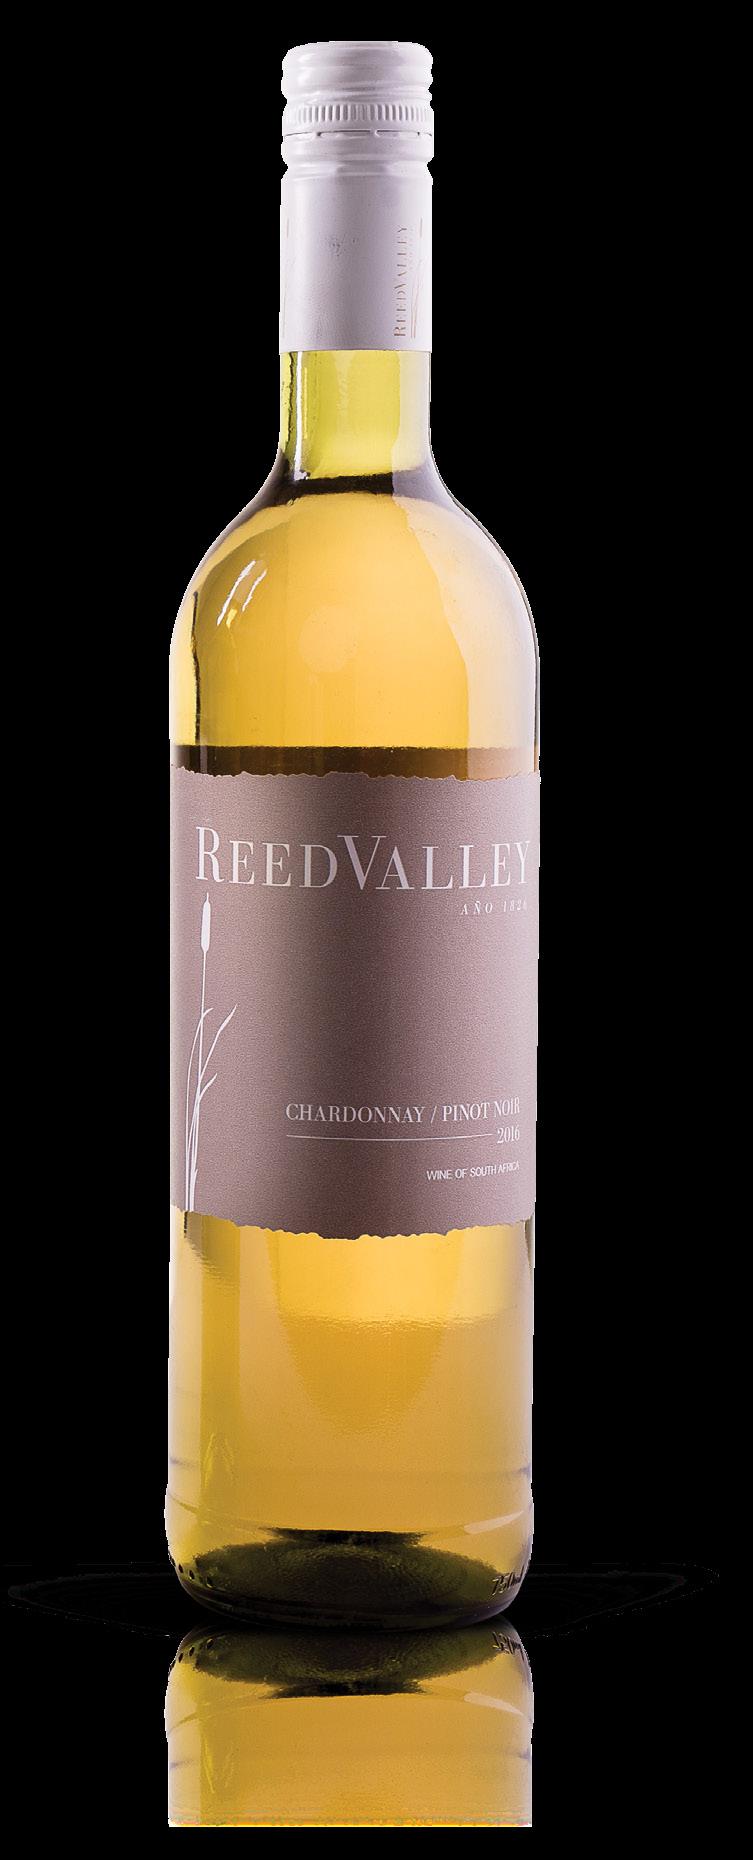 chardonnay / pinot noir This is an off-dry wine with upfront fresh floral flavours and a soft and fruity finish.